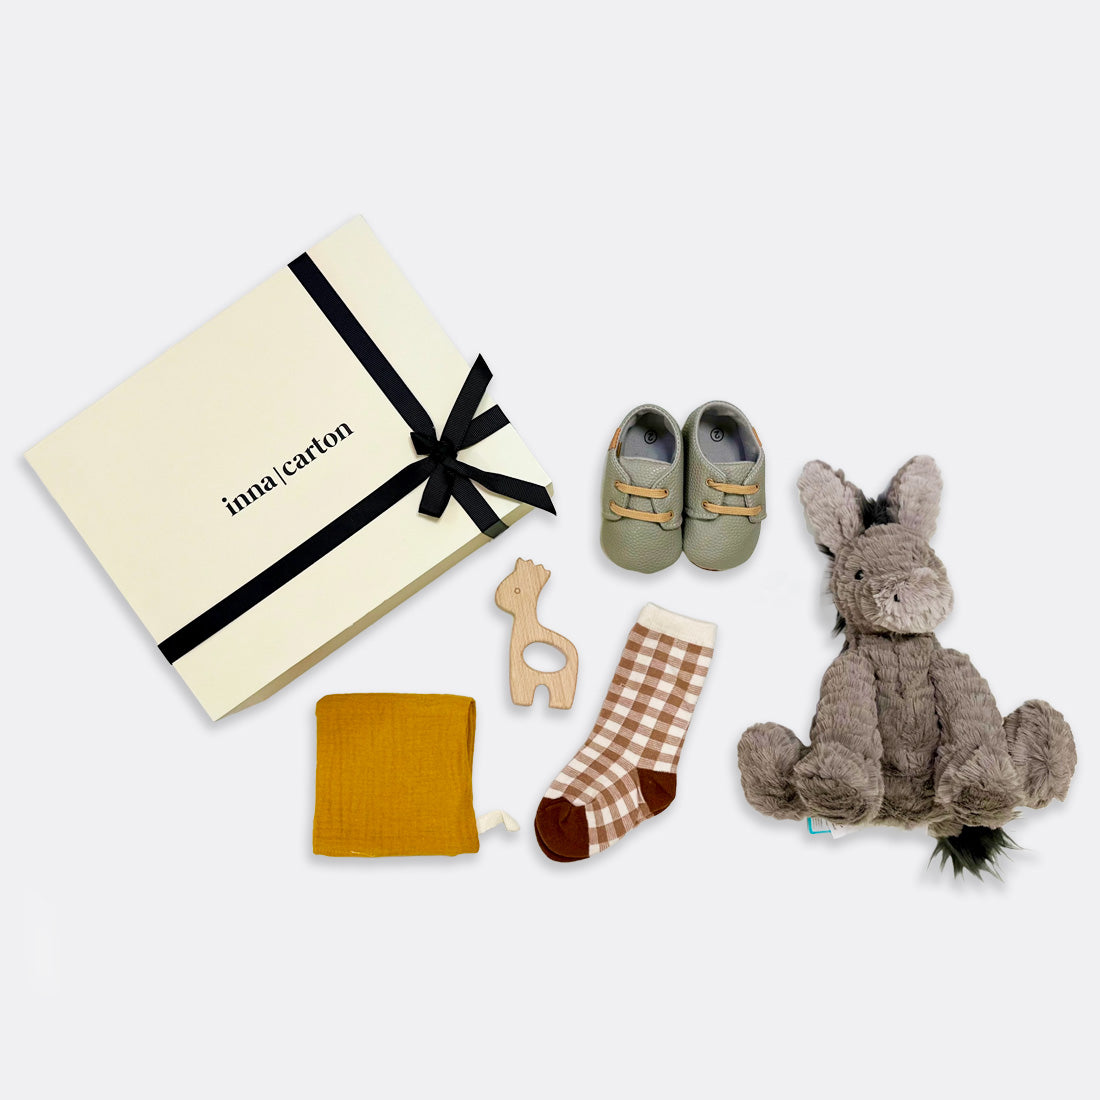 Fufflewuddle Donkey Soft Toy Baby Carreaux Socks | Tan (from 6-18 months) Muslin Square | Mustard Baby Beau Shoes (from 6-12 months) Gege Wooden Teether, shop the best Christmas gift gifts for her for him from Inna carton online store dubai, UAE!